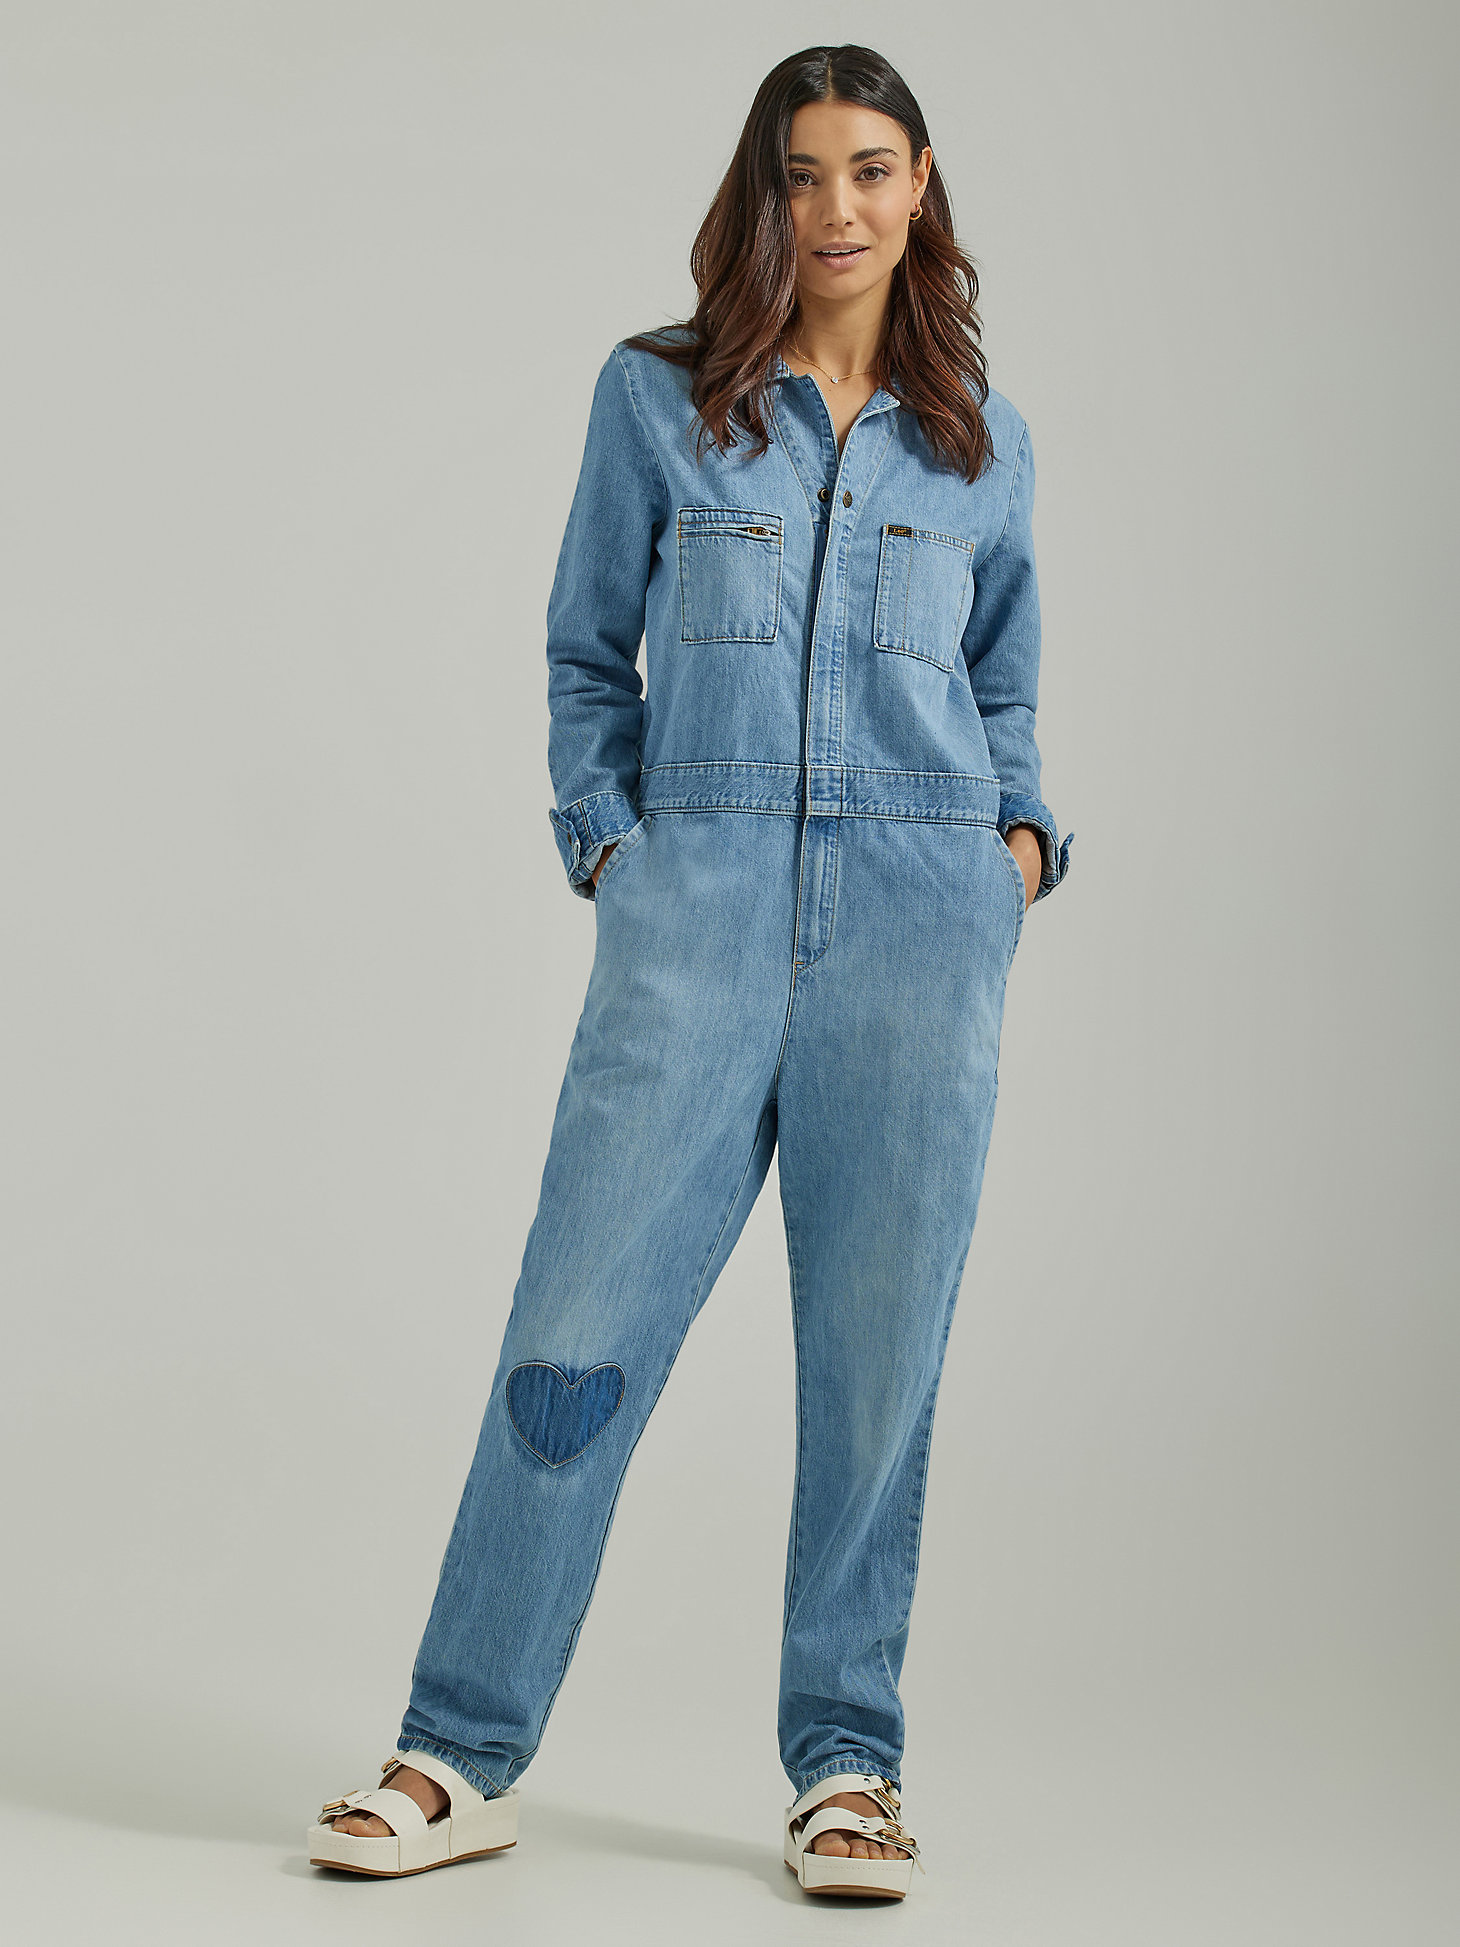 Women's Vintage Modern Union-Alls® in Current One main view